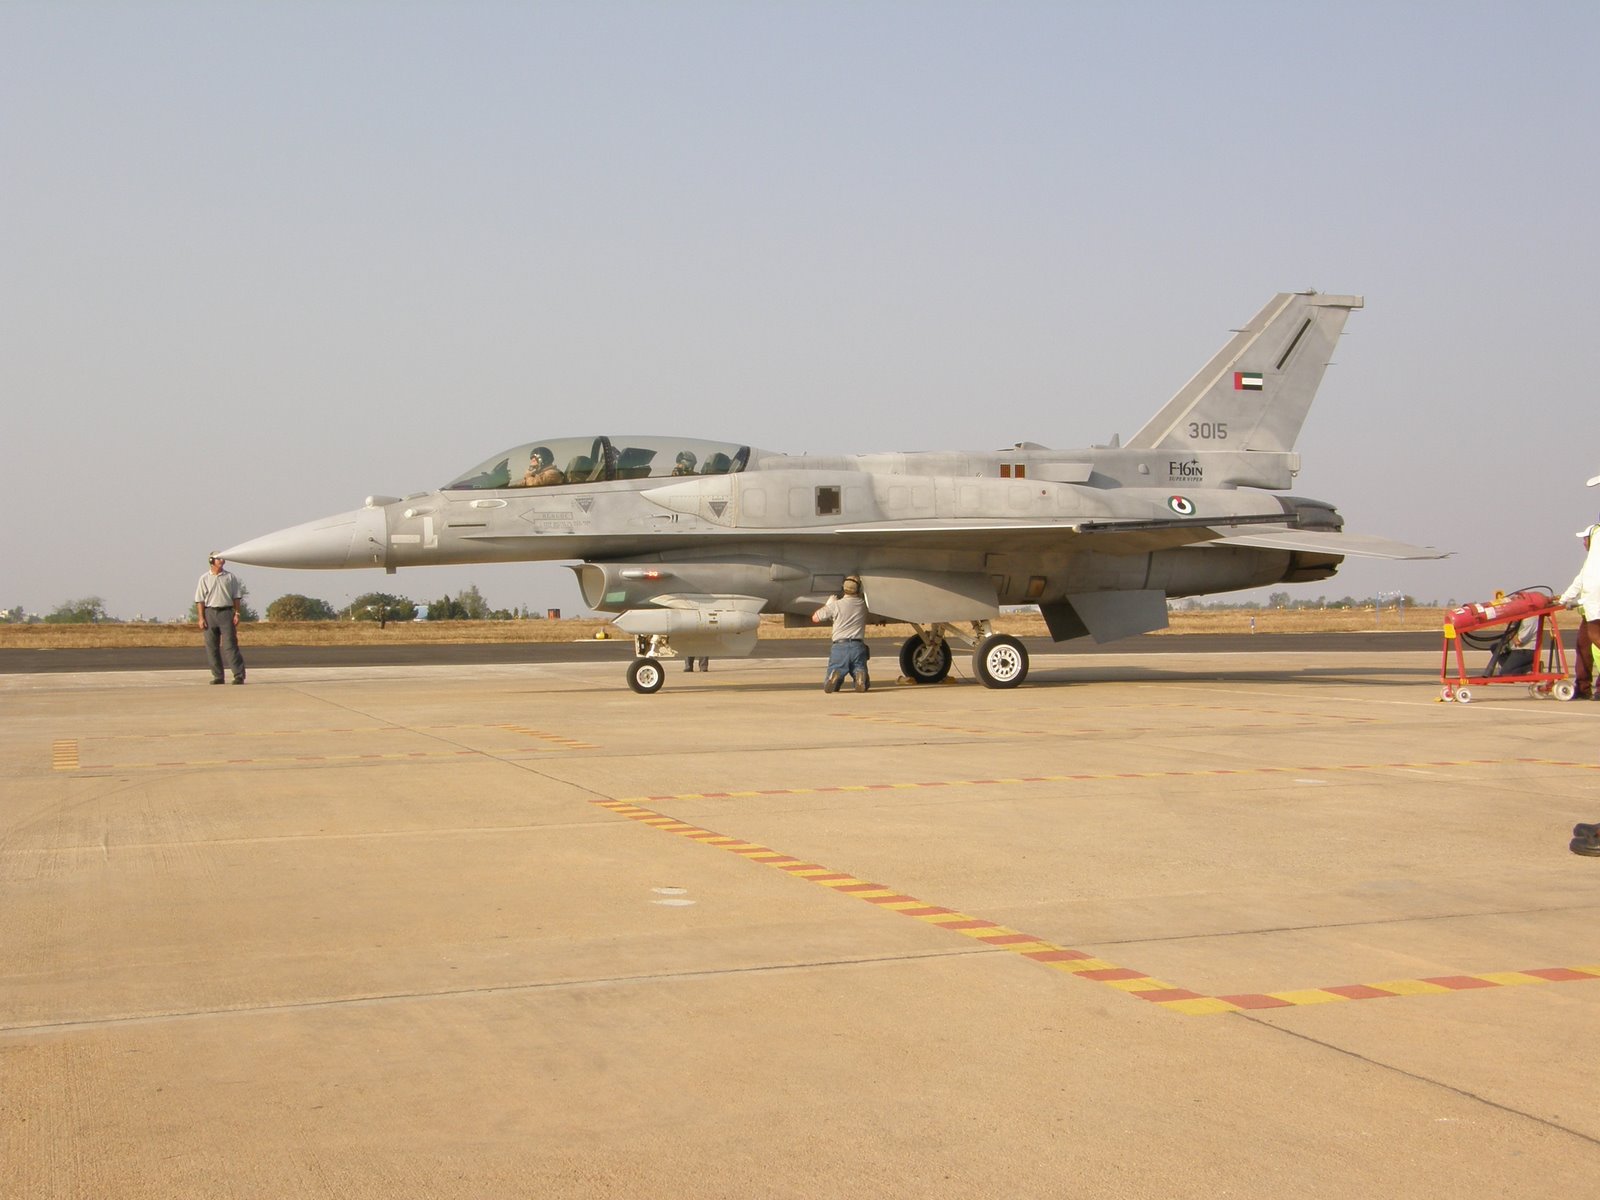            'Super Viper' F16IN (India)
Lockheed-Martin's 'Super Viper' F16IN (F16 India For Export) at Jaisalmer Airbase during field-trials in April 2009